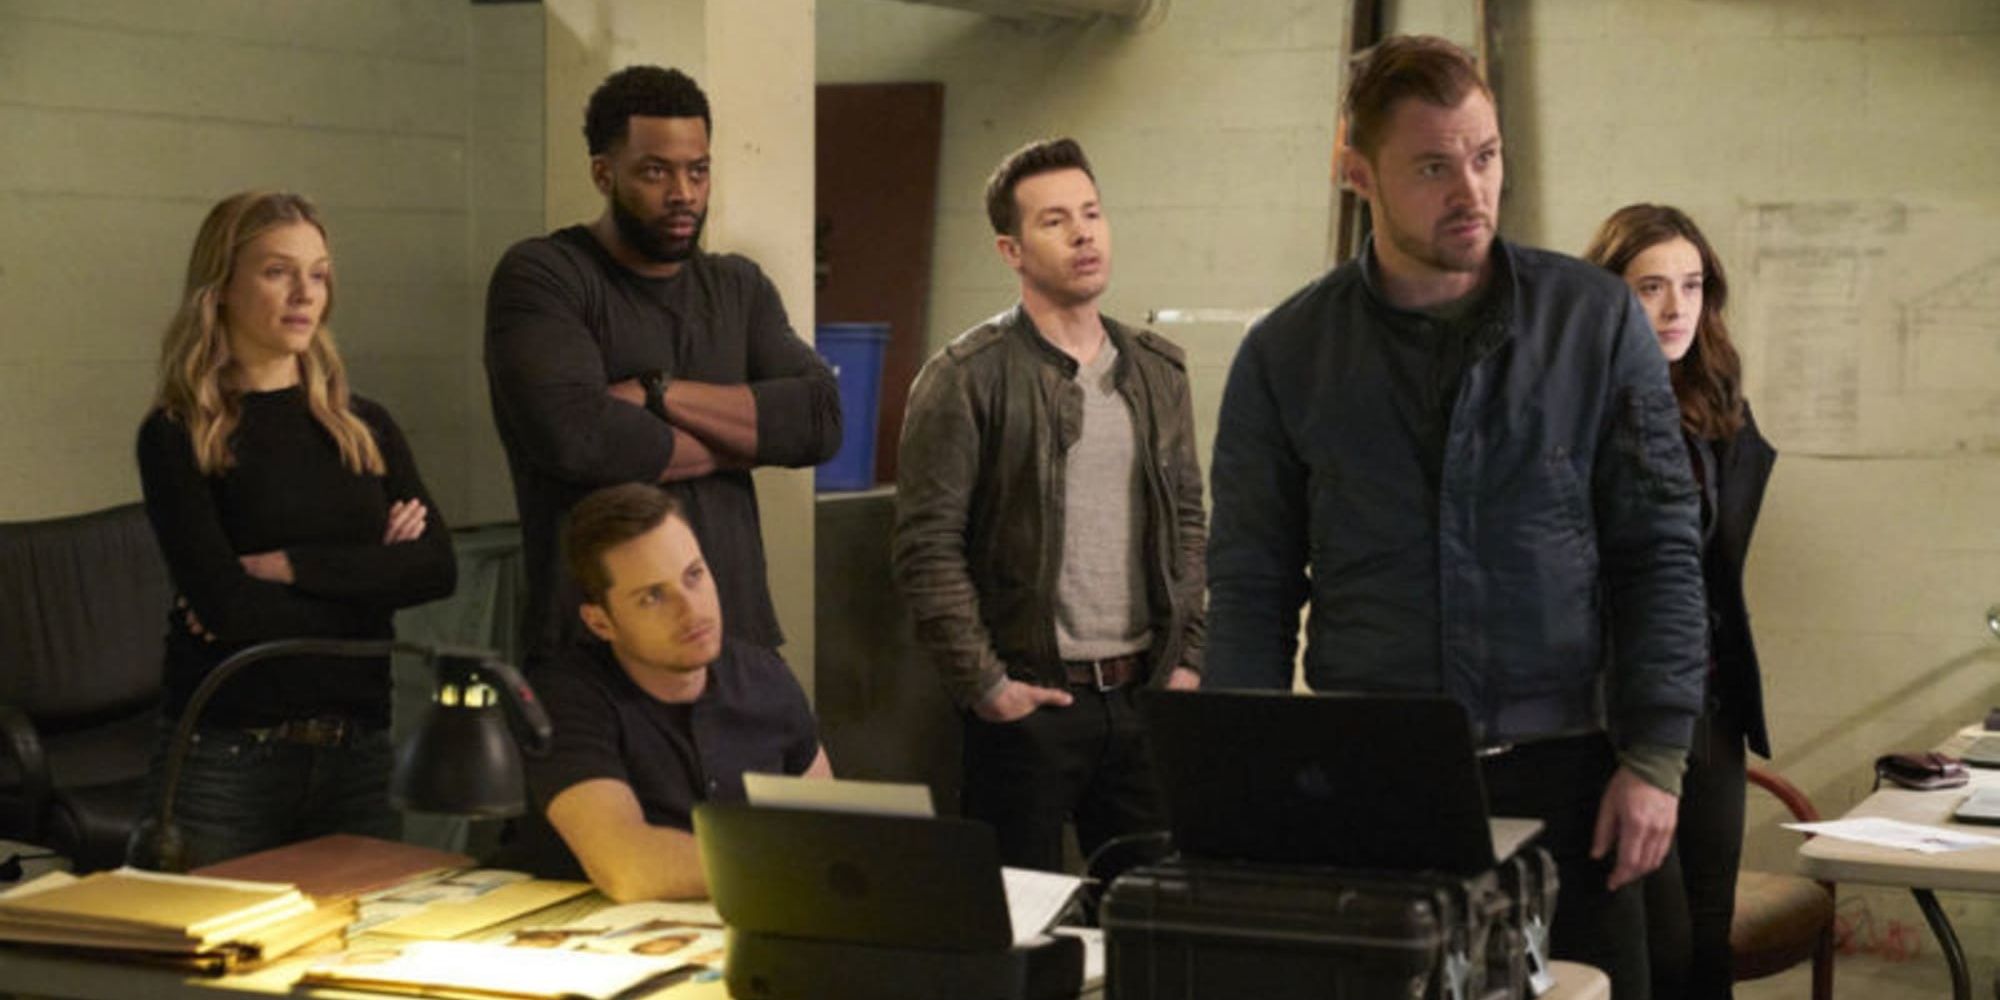 Intelligence Unit members learn about Olinsky's death in Chicago PD